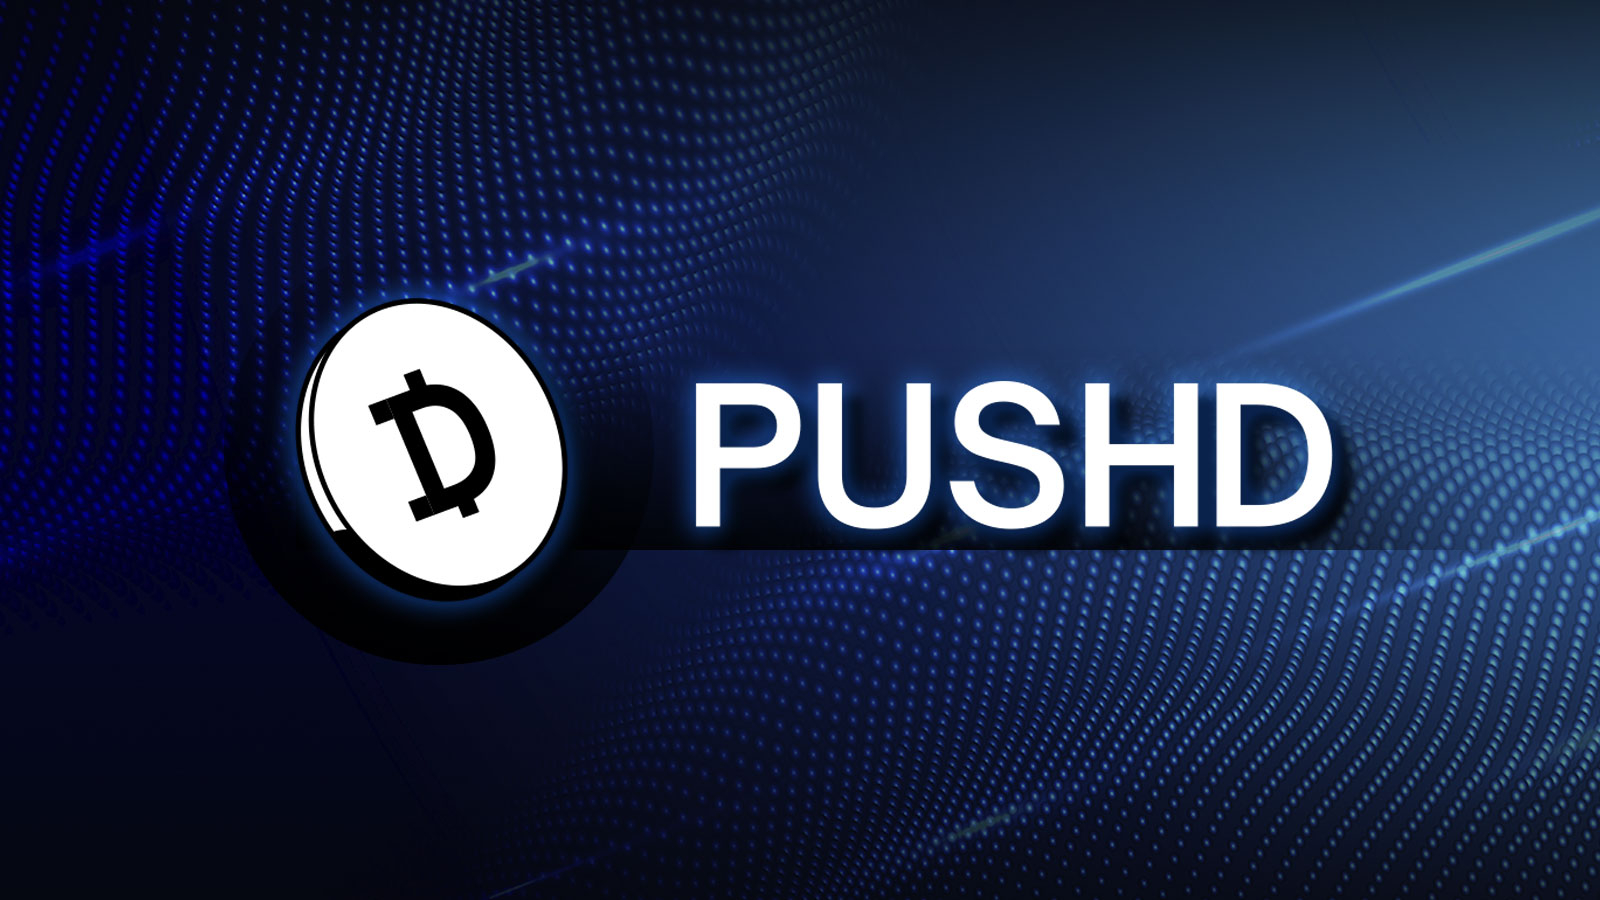 Pushd (PUSHD) Tokensale Gaining Steam in January as XRP, Tether (USDT) Communities Are In Focus